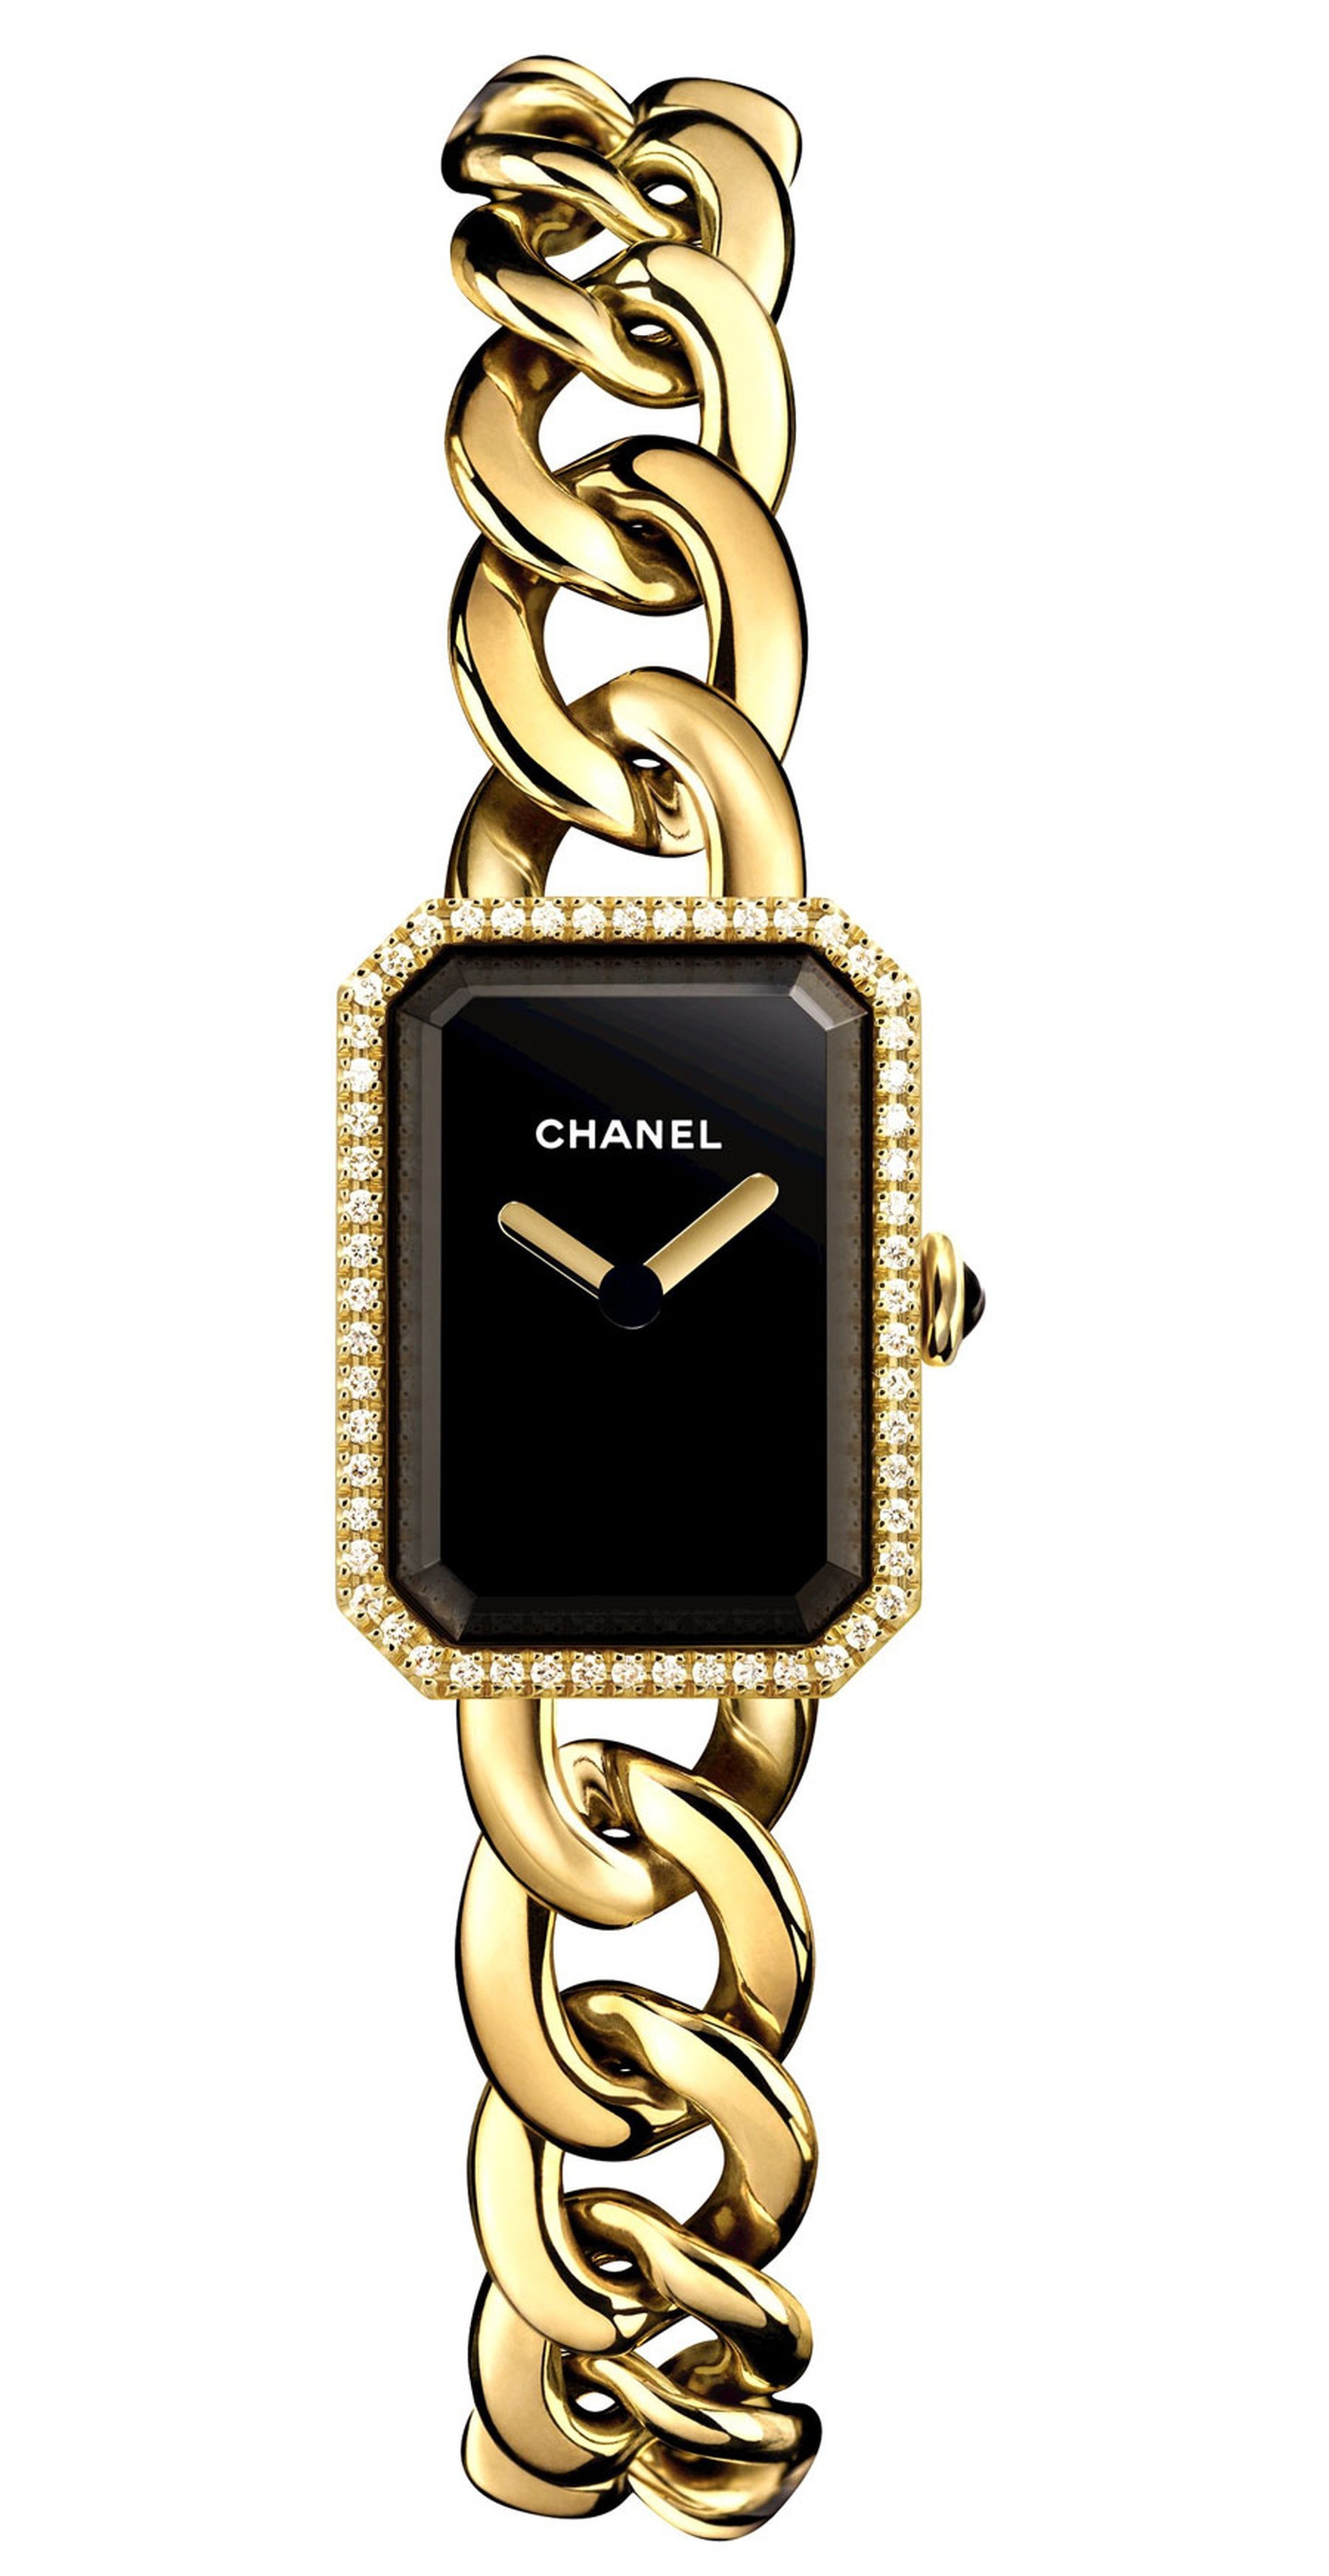 Chanel Premiere Small Size Ladies Watch H3258